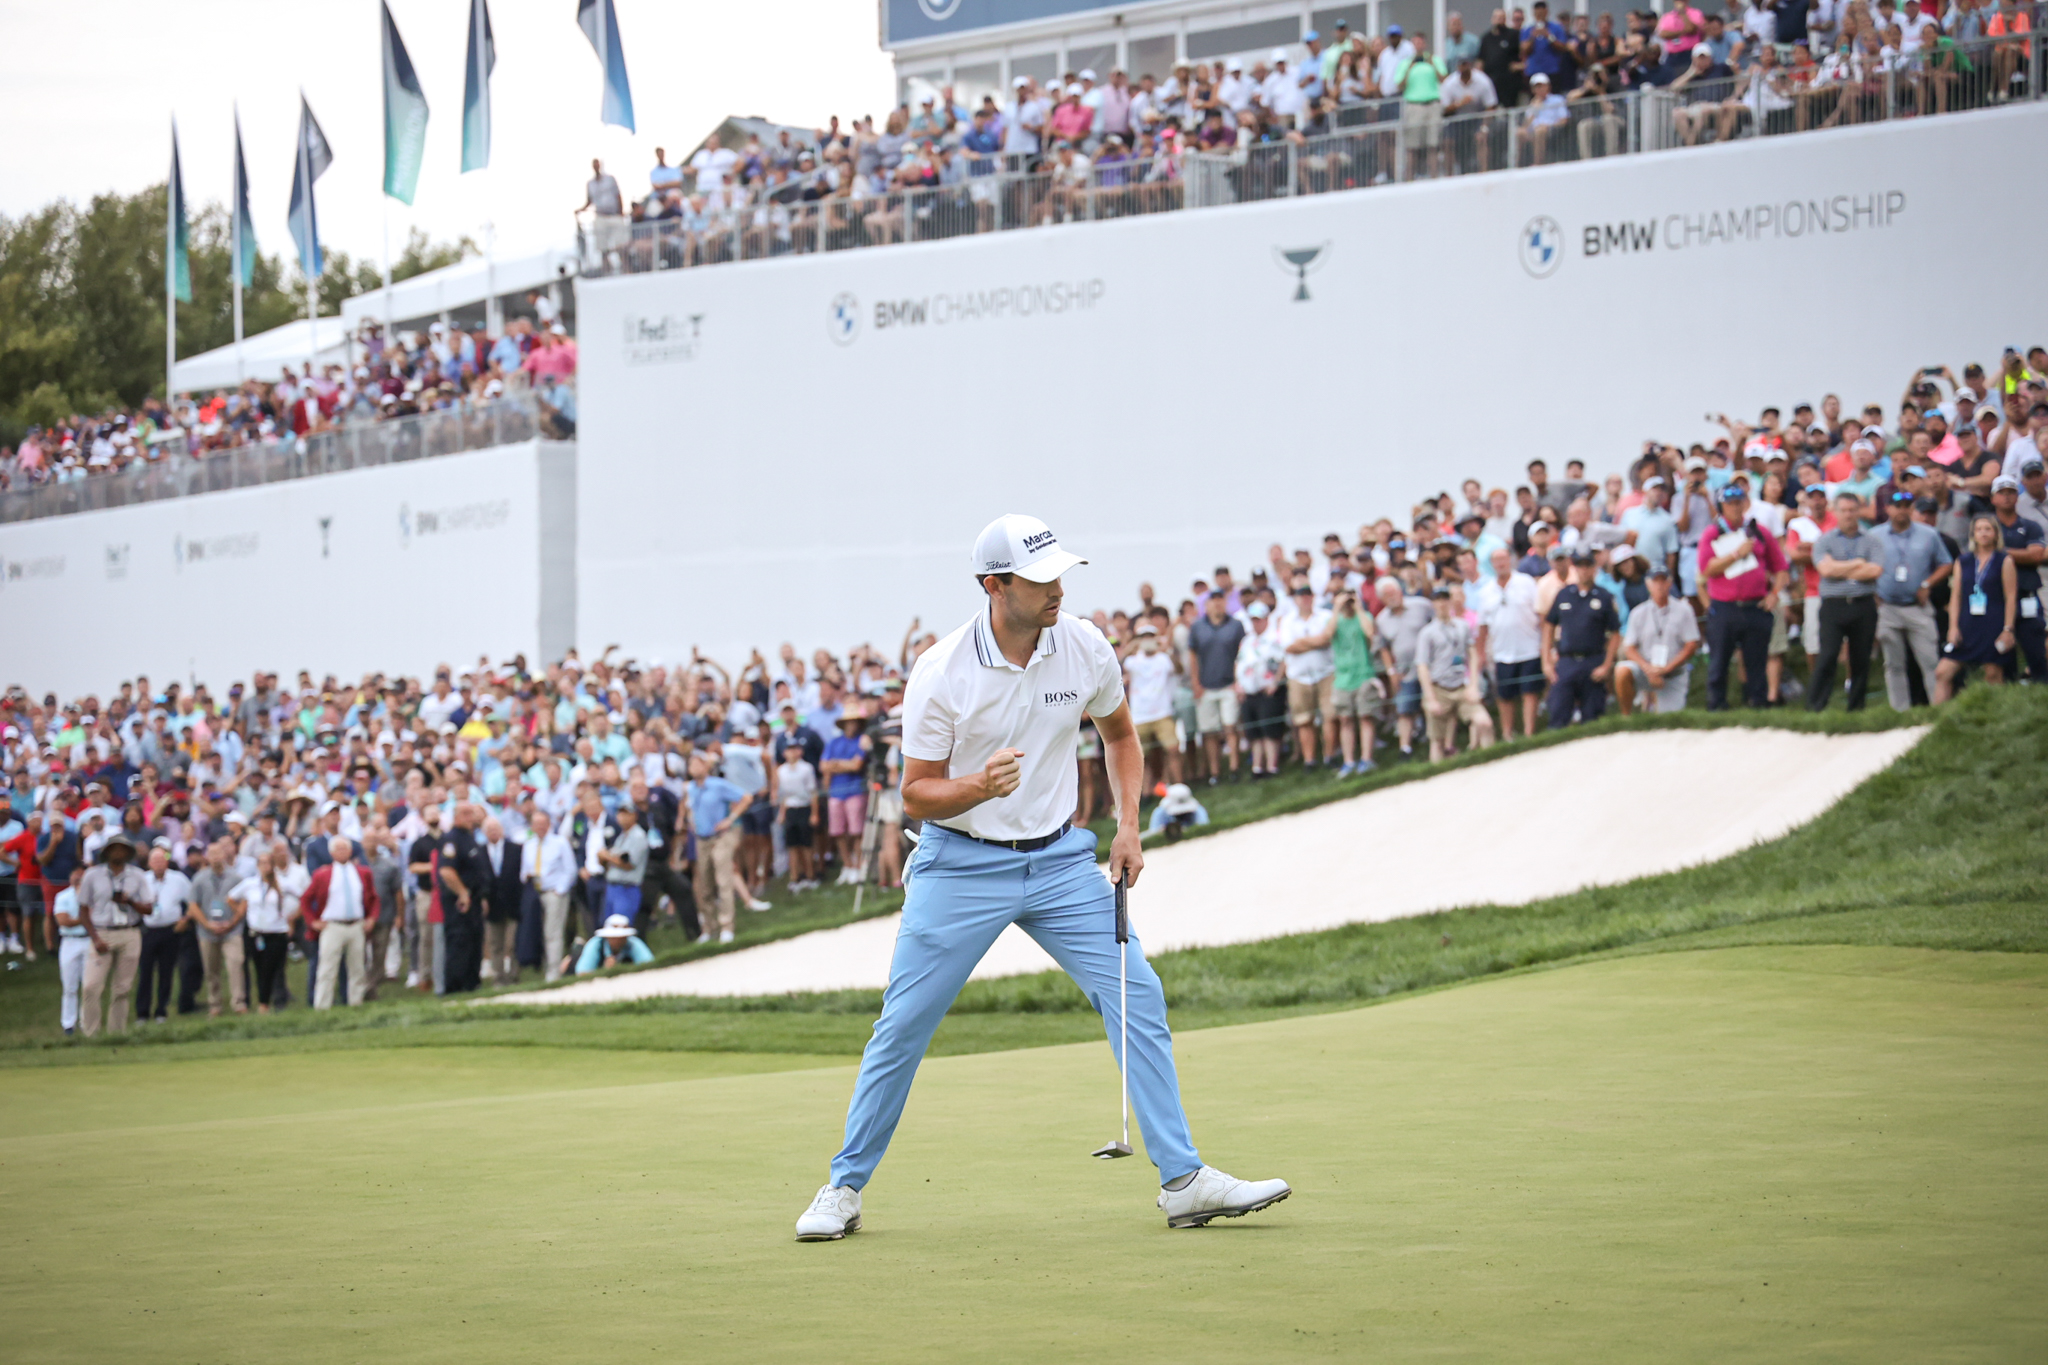 WATCH 2022 BMW Championship Live: TV Coverage, How to Stream Now